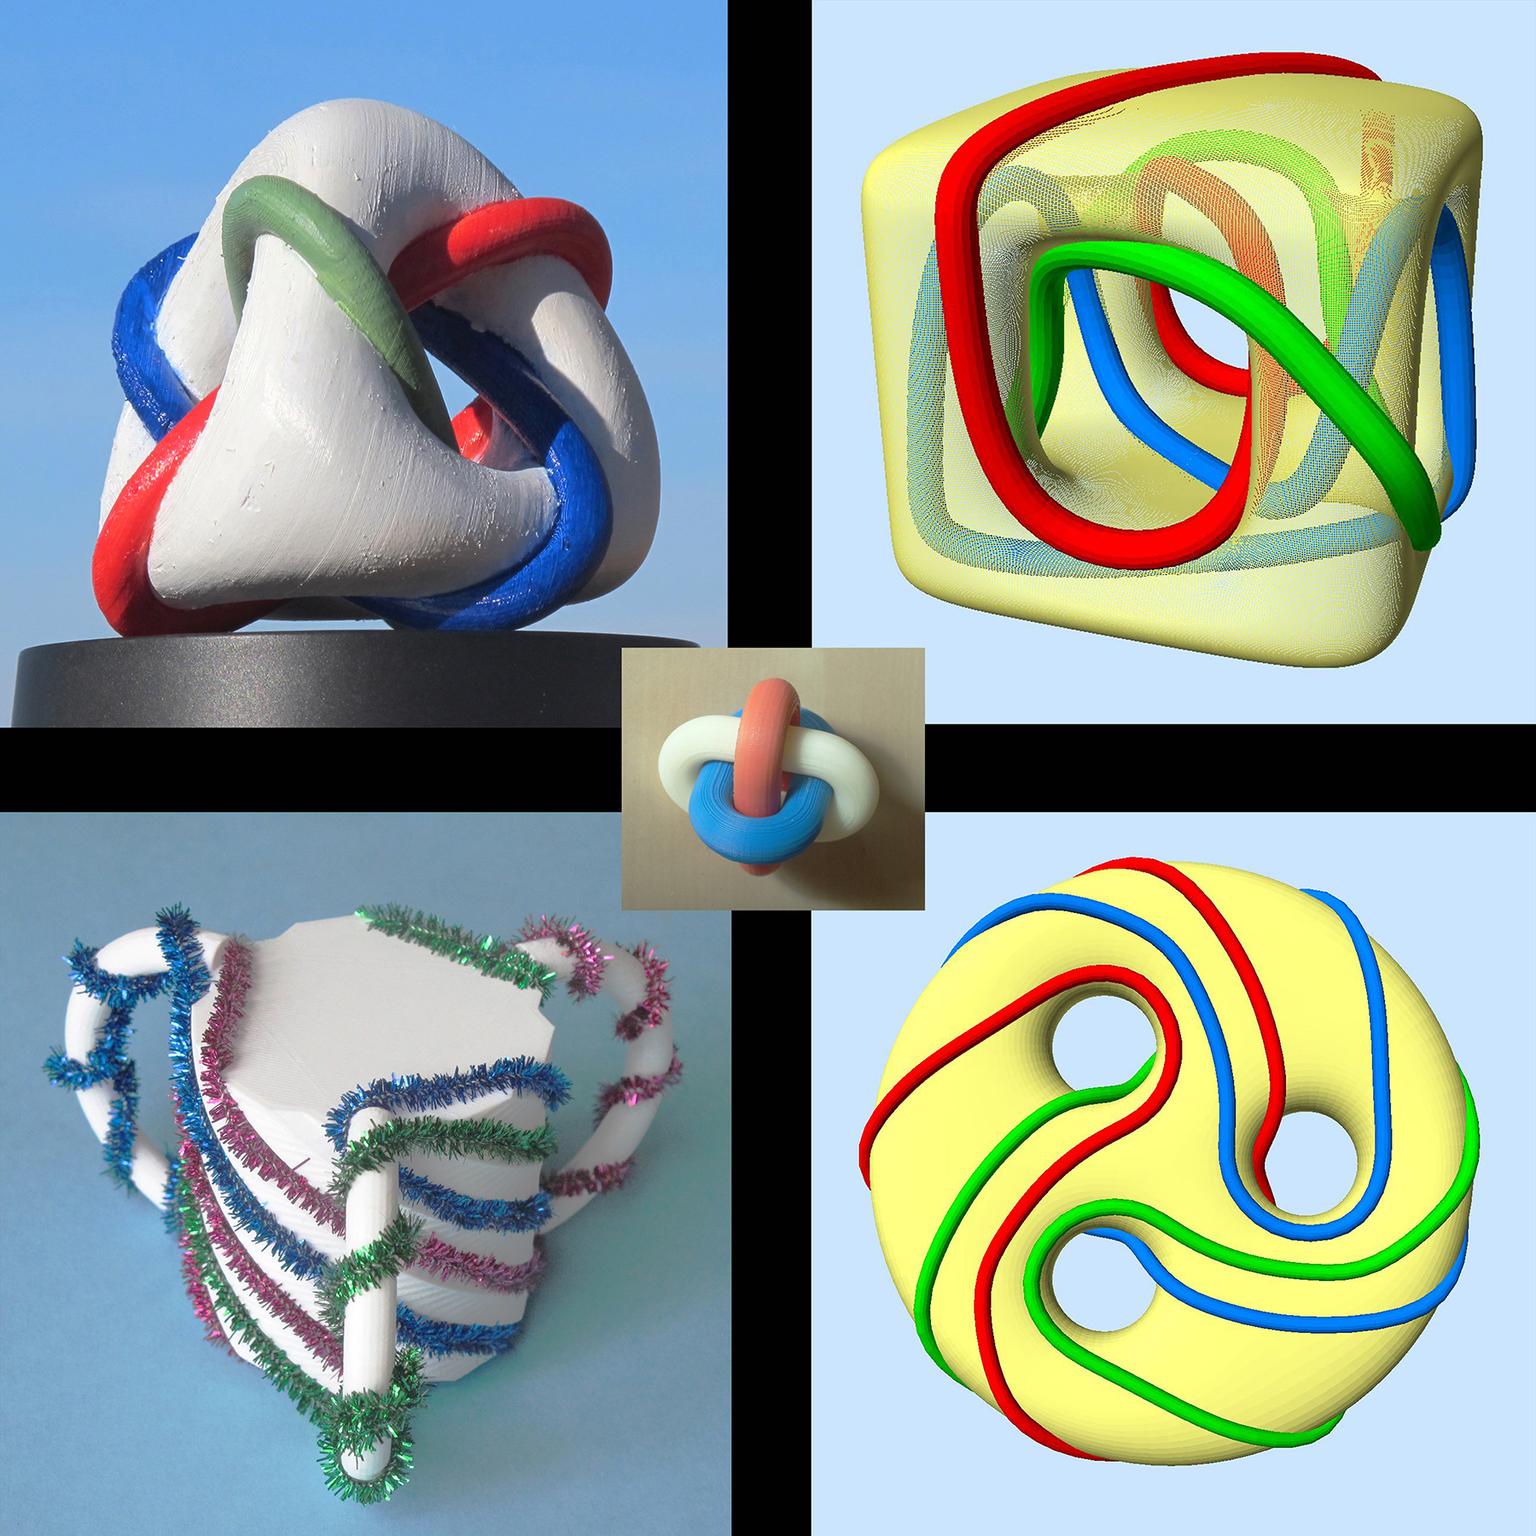 Image for entry 'Four Different Embeddings of the Borromean Rings'